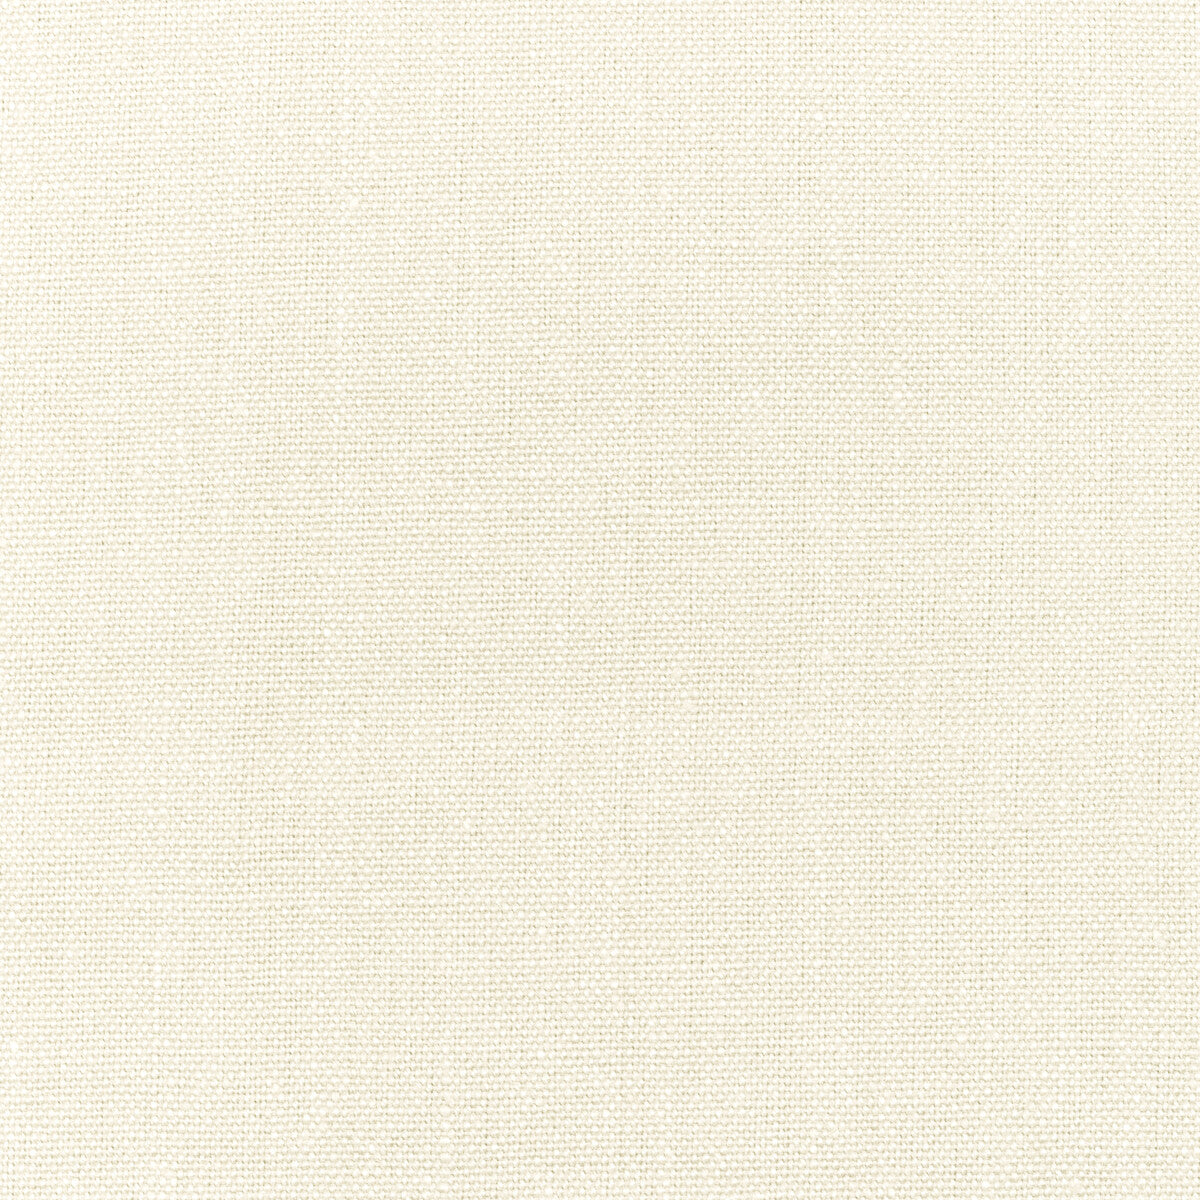 Sweeting fabric in ivory color - pattern 32815.101.0 - by Kravet Basics in the Thom Filicia collection